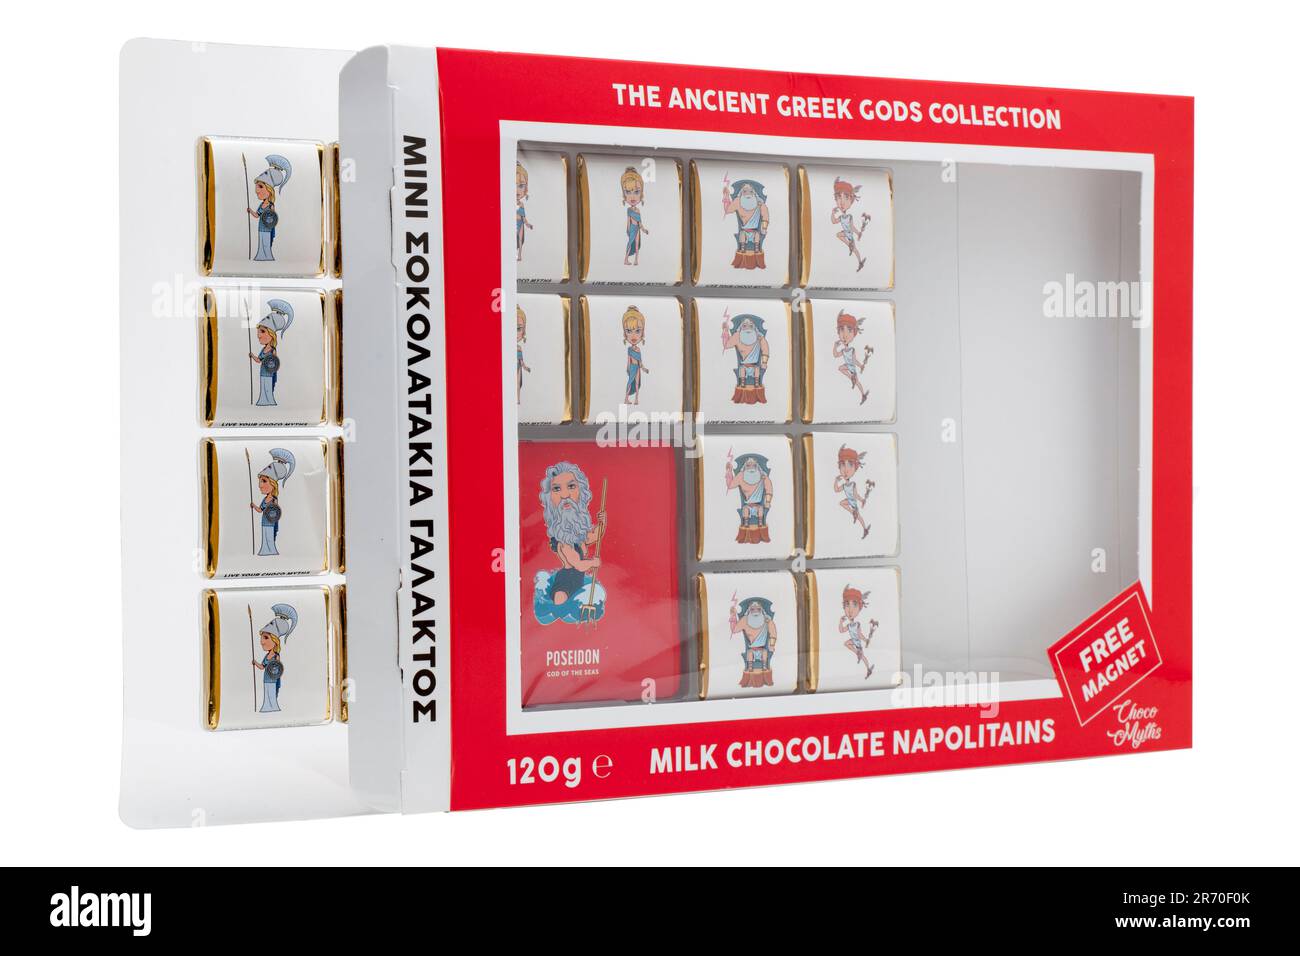 From Choco Myths a 120g Box of their The Ancient Greek Gods Collection Milk Chocolate Napolitains with Free Legendary Magnet Stock Photo